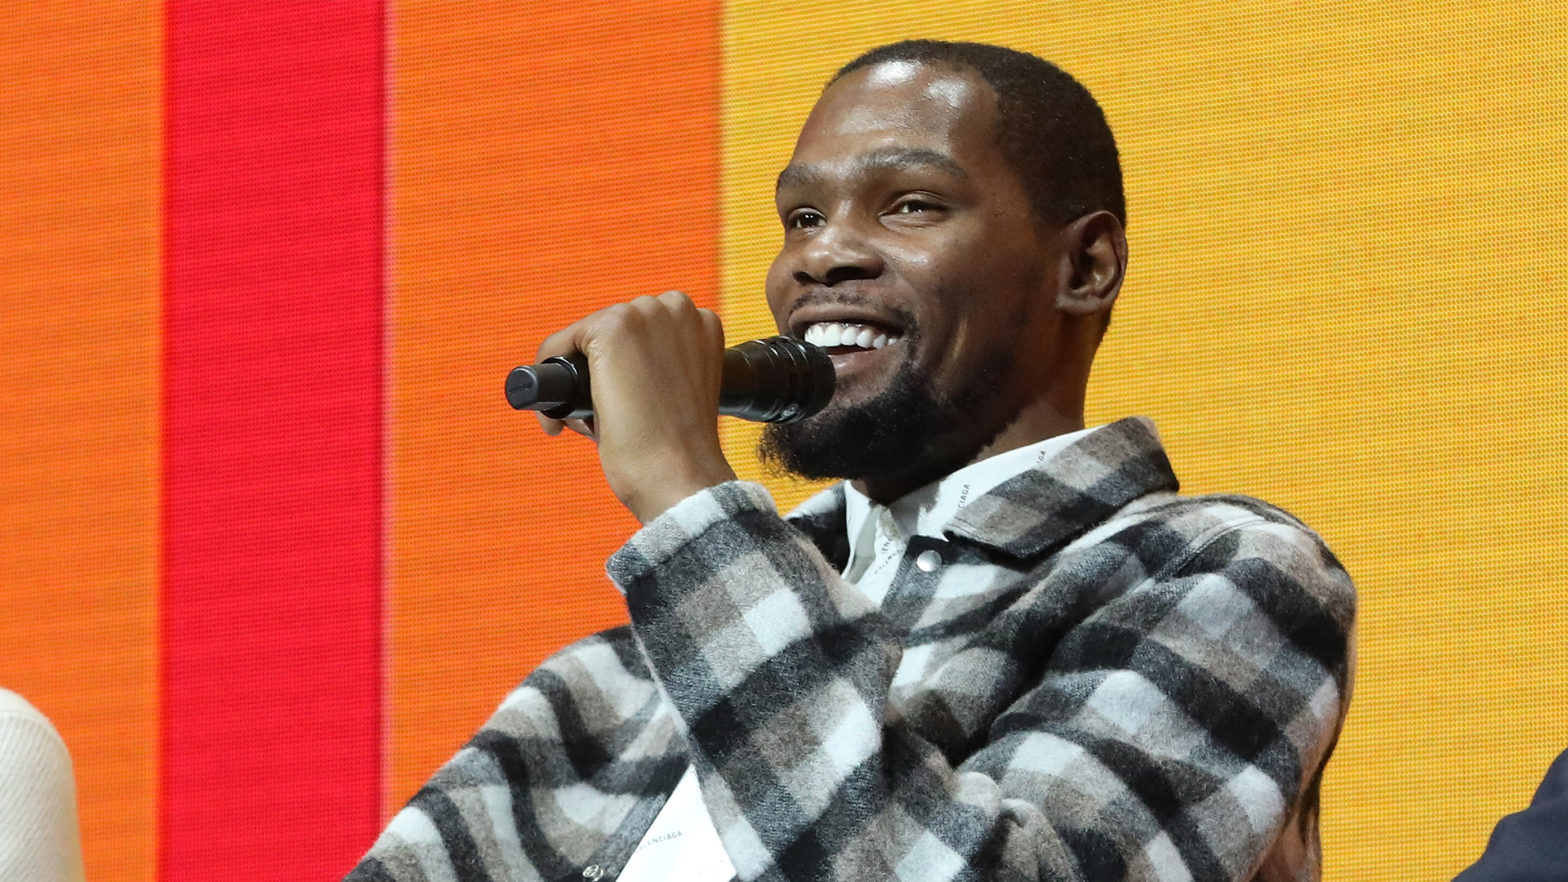 Kevin Durant Becomes The Face Of Multi-Billion Dollar Crypto Company Coinbase